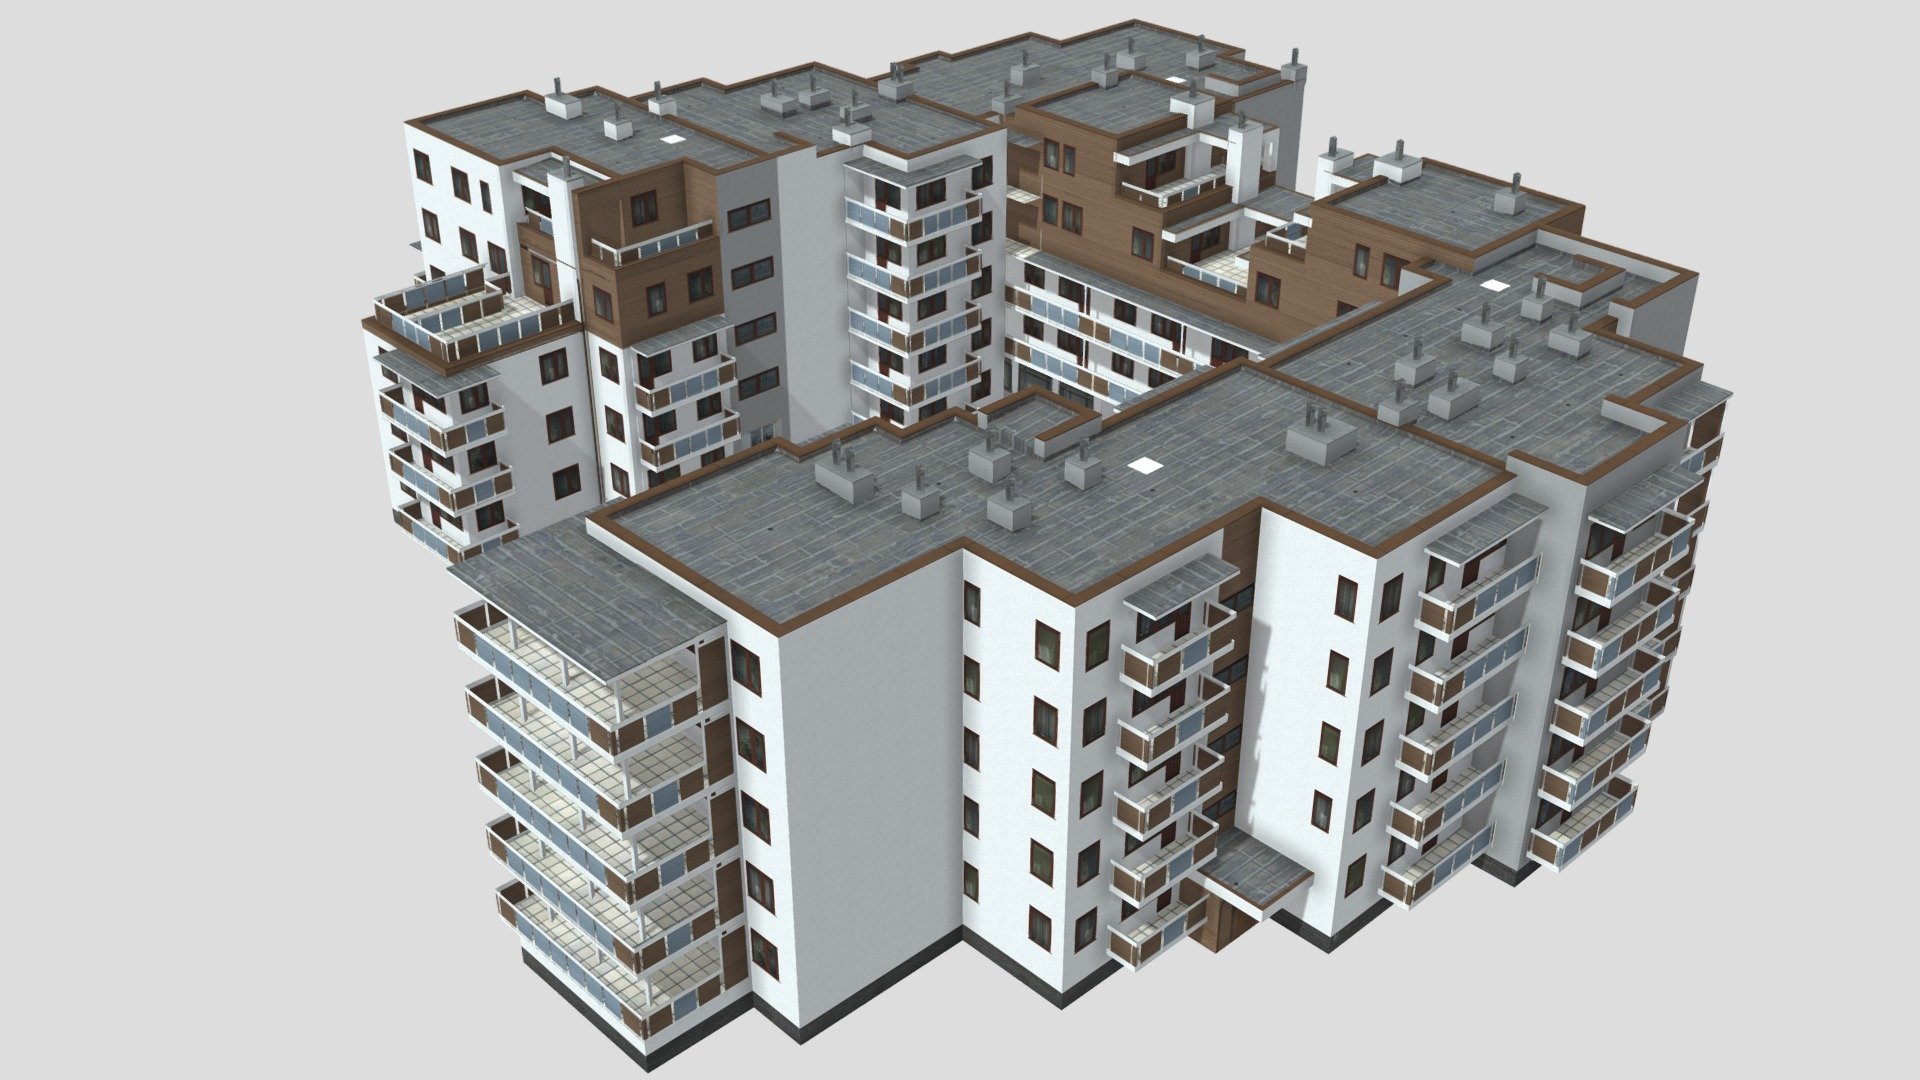 Extra low-poly residential building from the city of Rzeszów, Poland.
Absolute optimization, ideal for background scenes. As well texture can be compressed up to 1k resolution 3d model